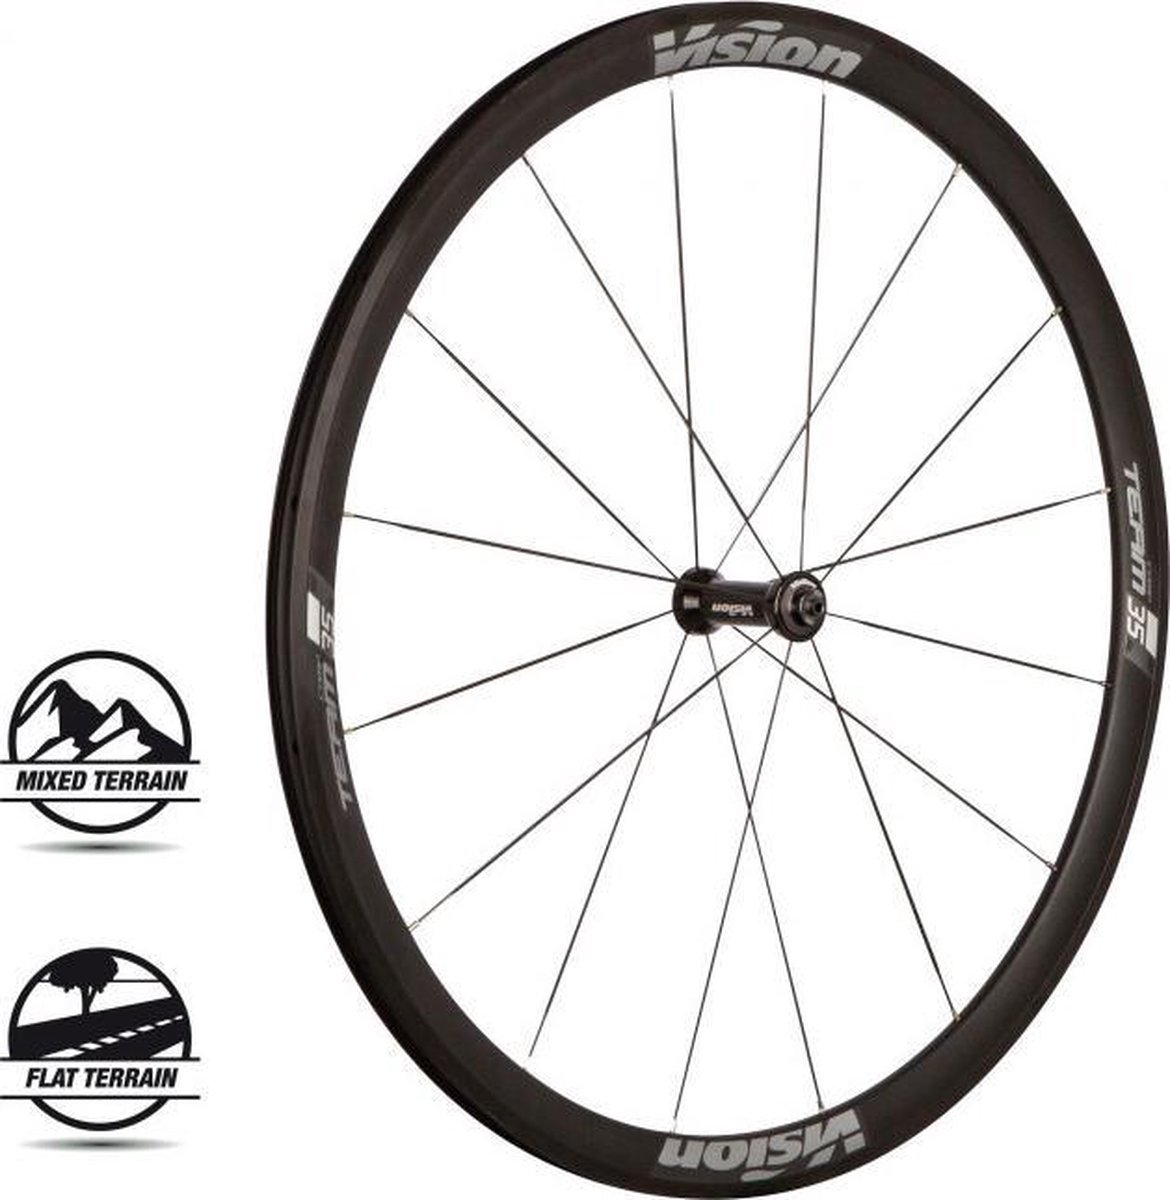 Vision Wielset Team 35 Comp SL Clincher Shimano